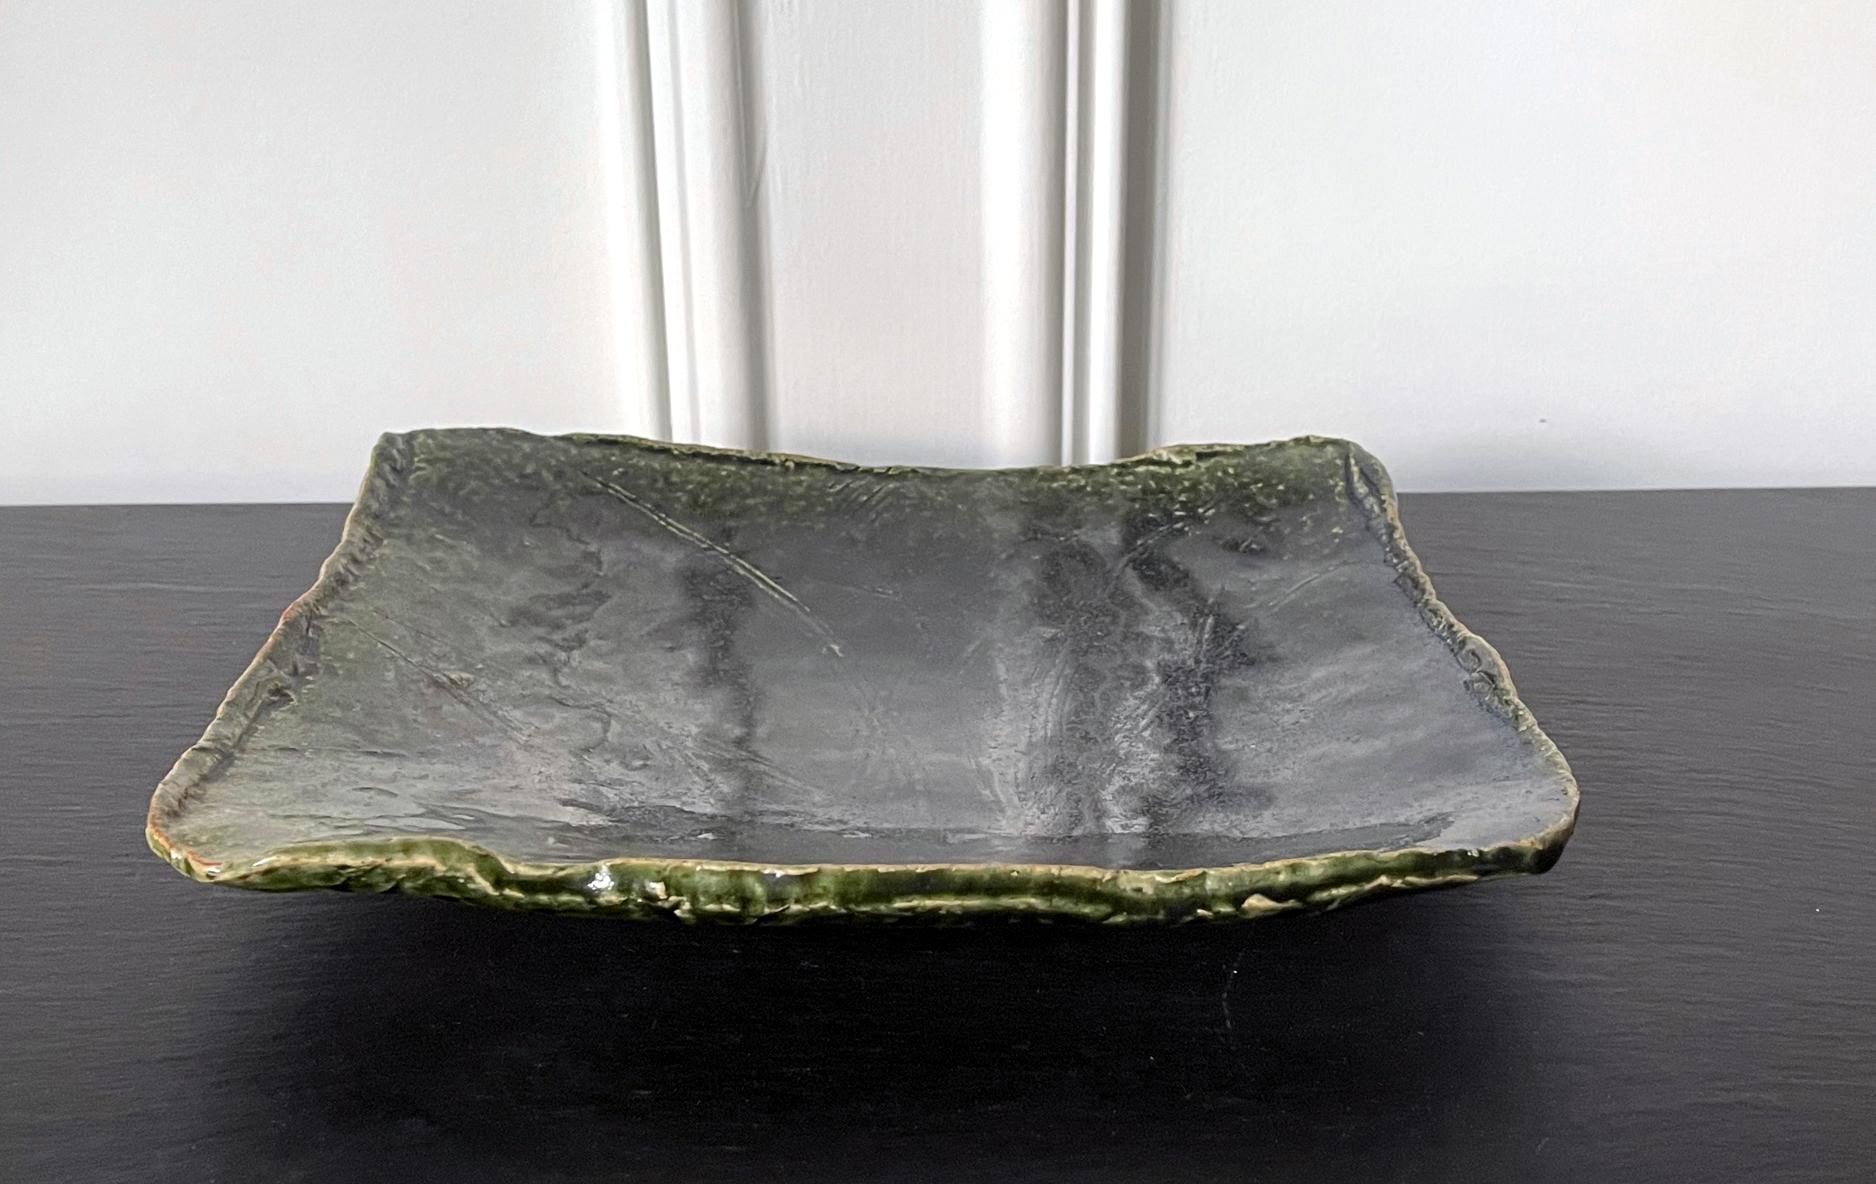 An Oribe-Style rectangular dish with a slightly concaved slab body and up-turned irregular edges, made by Kitaoji Rosanjin (1883-1959) circa 1930-50s. The surface of the stoneware was incised with a design of grass blades, possibly iris plants, and